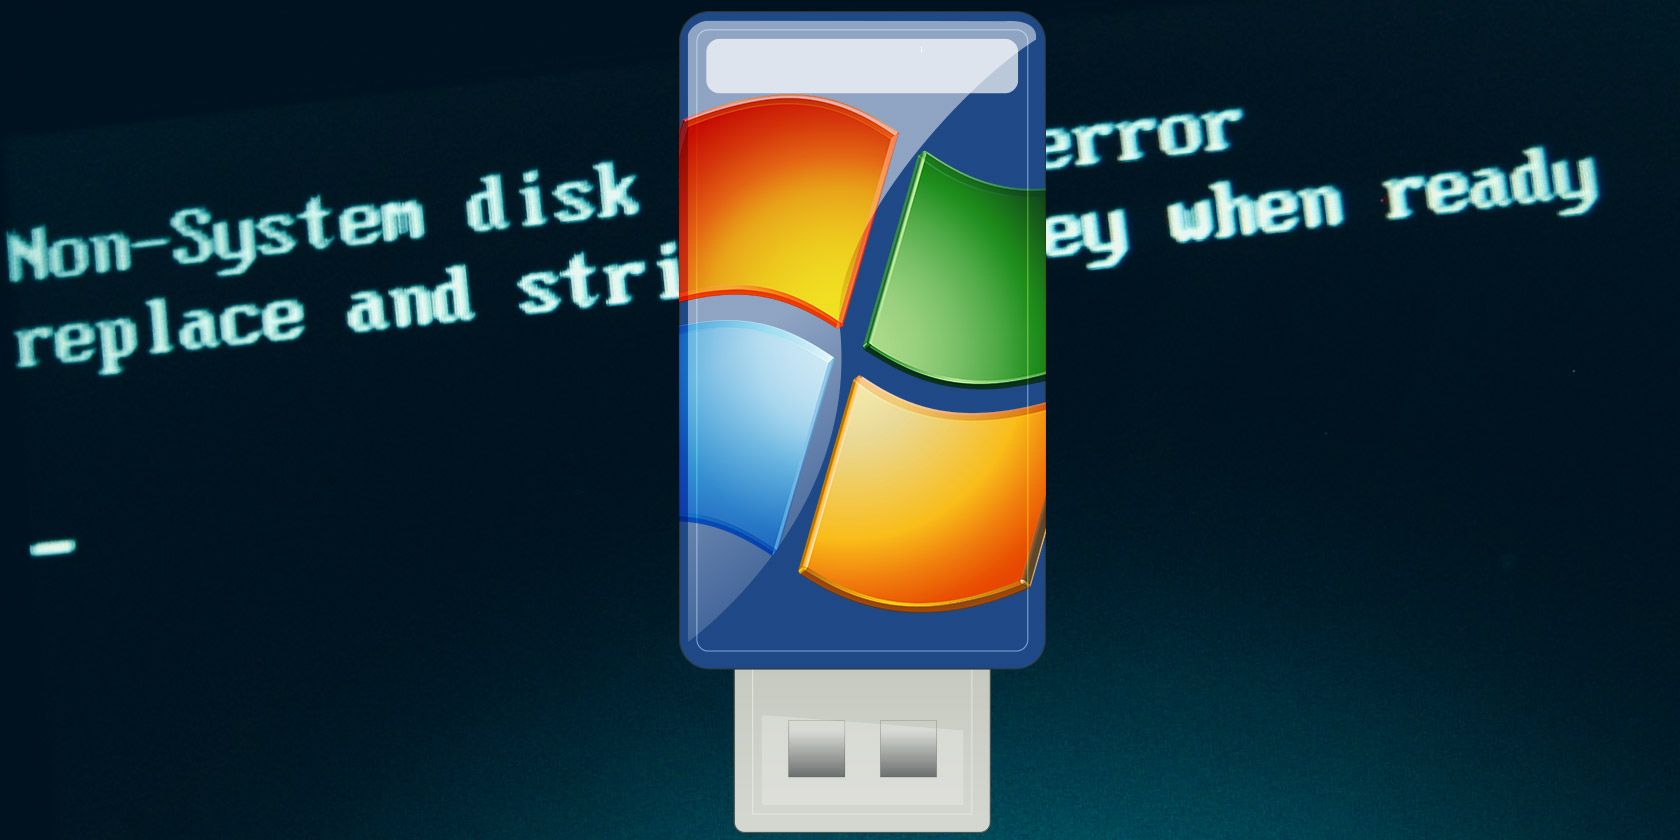 how to install windows 7 on macbook from usb drive